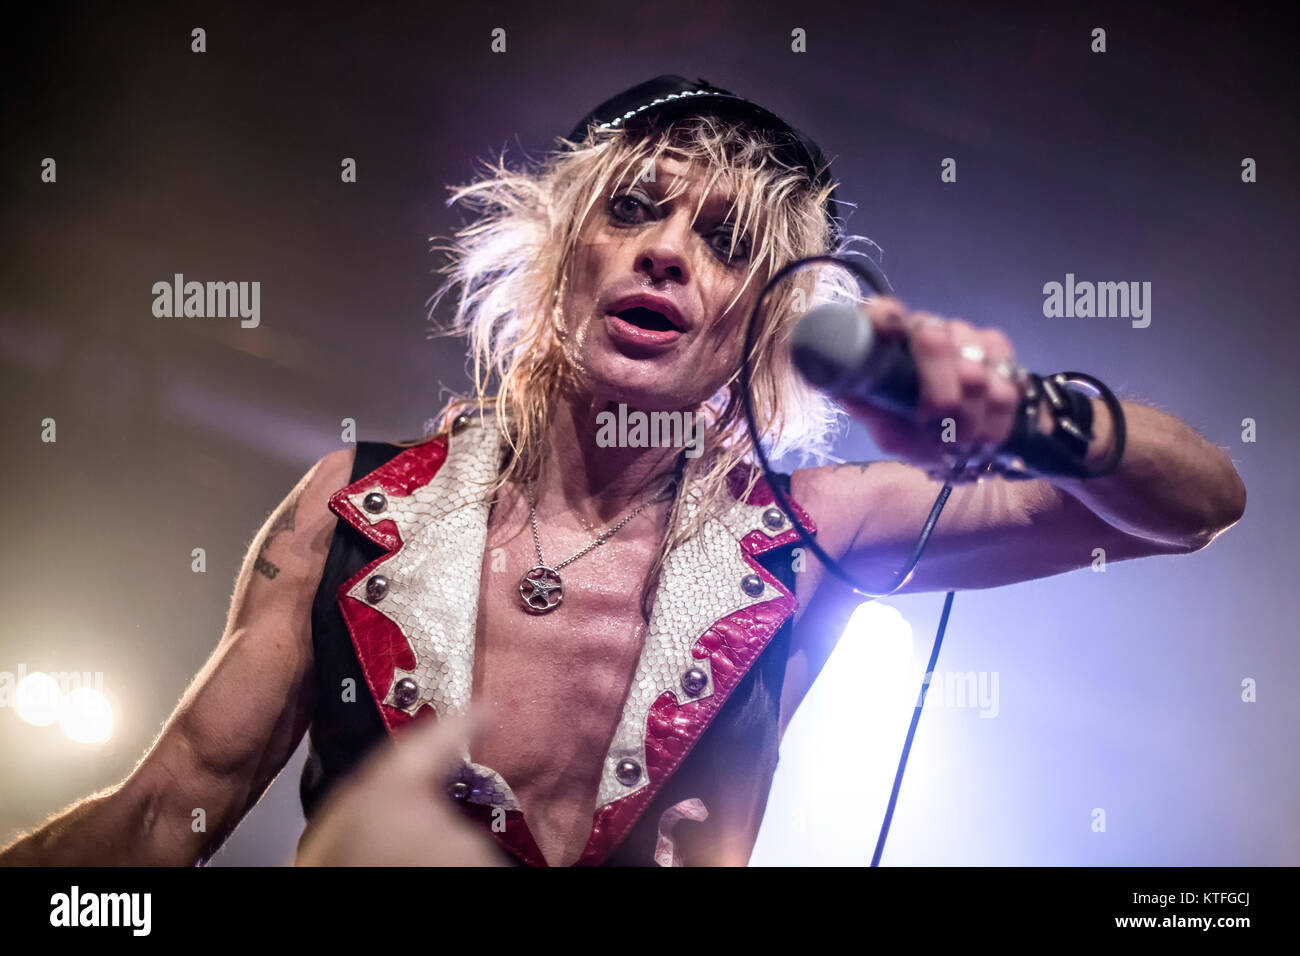 The Finnish rock musician and glam rock singer Michael Monroe performs live at Gjerdrum Kulturhus. Michael Monroe was known as the vocalist of the bands Hanoi Rocks, Demolition 23 and Jerusalem Slim. Norway, 22/10 2016. Stock Photo